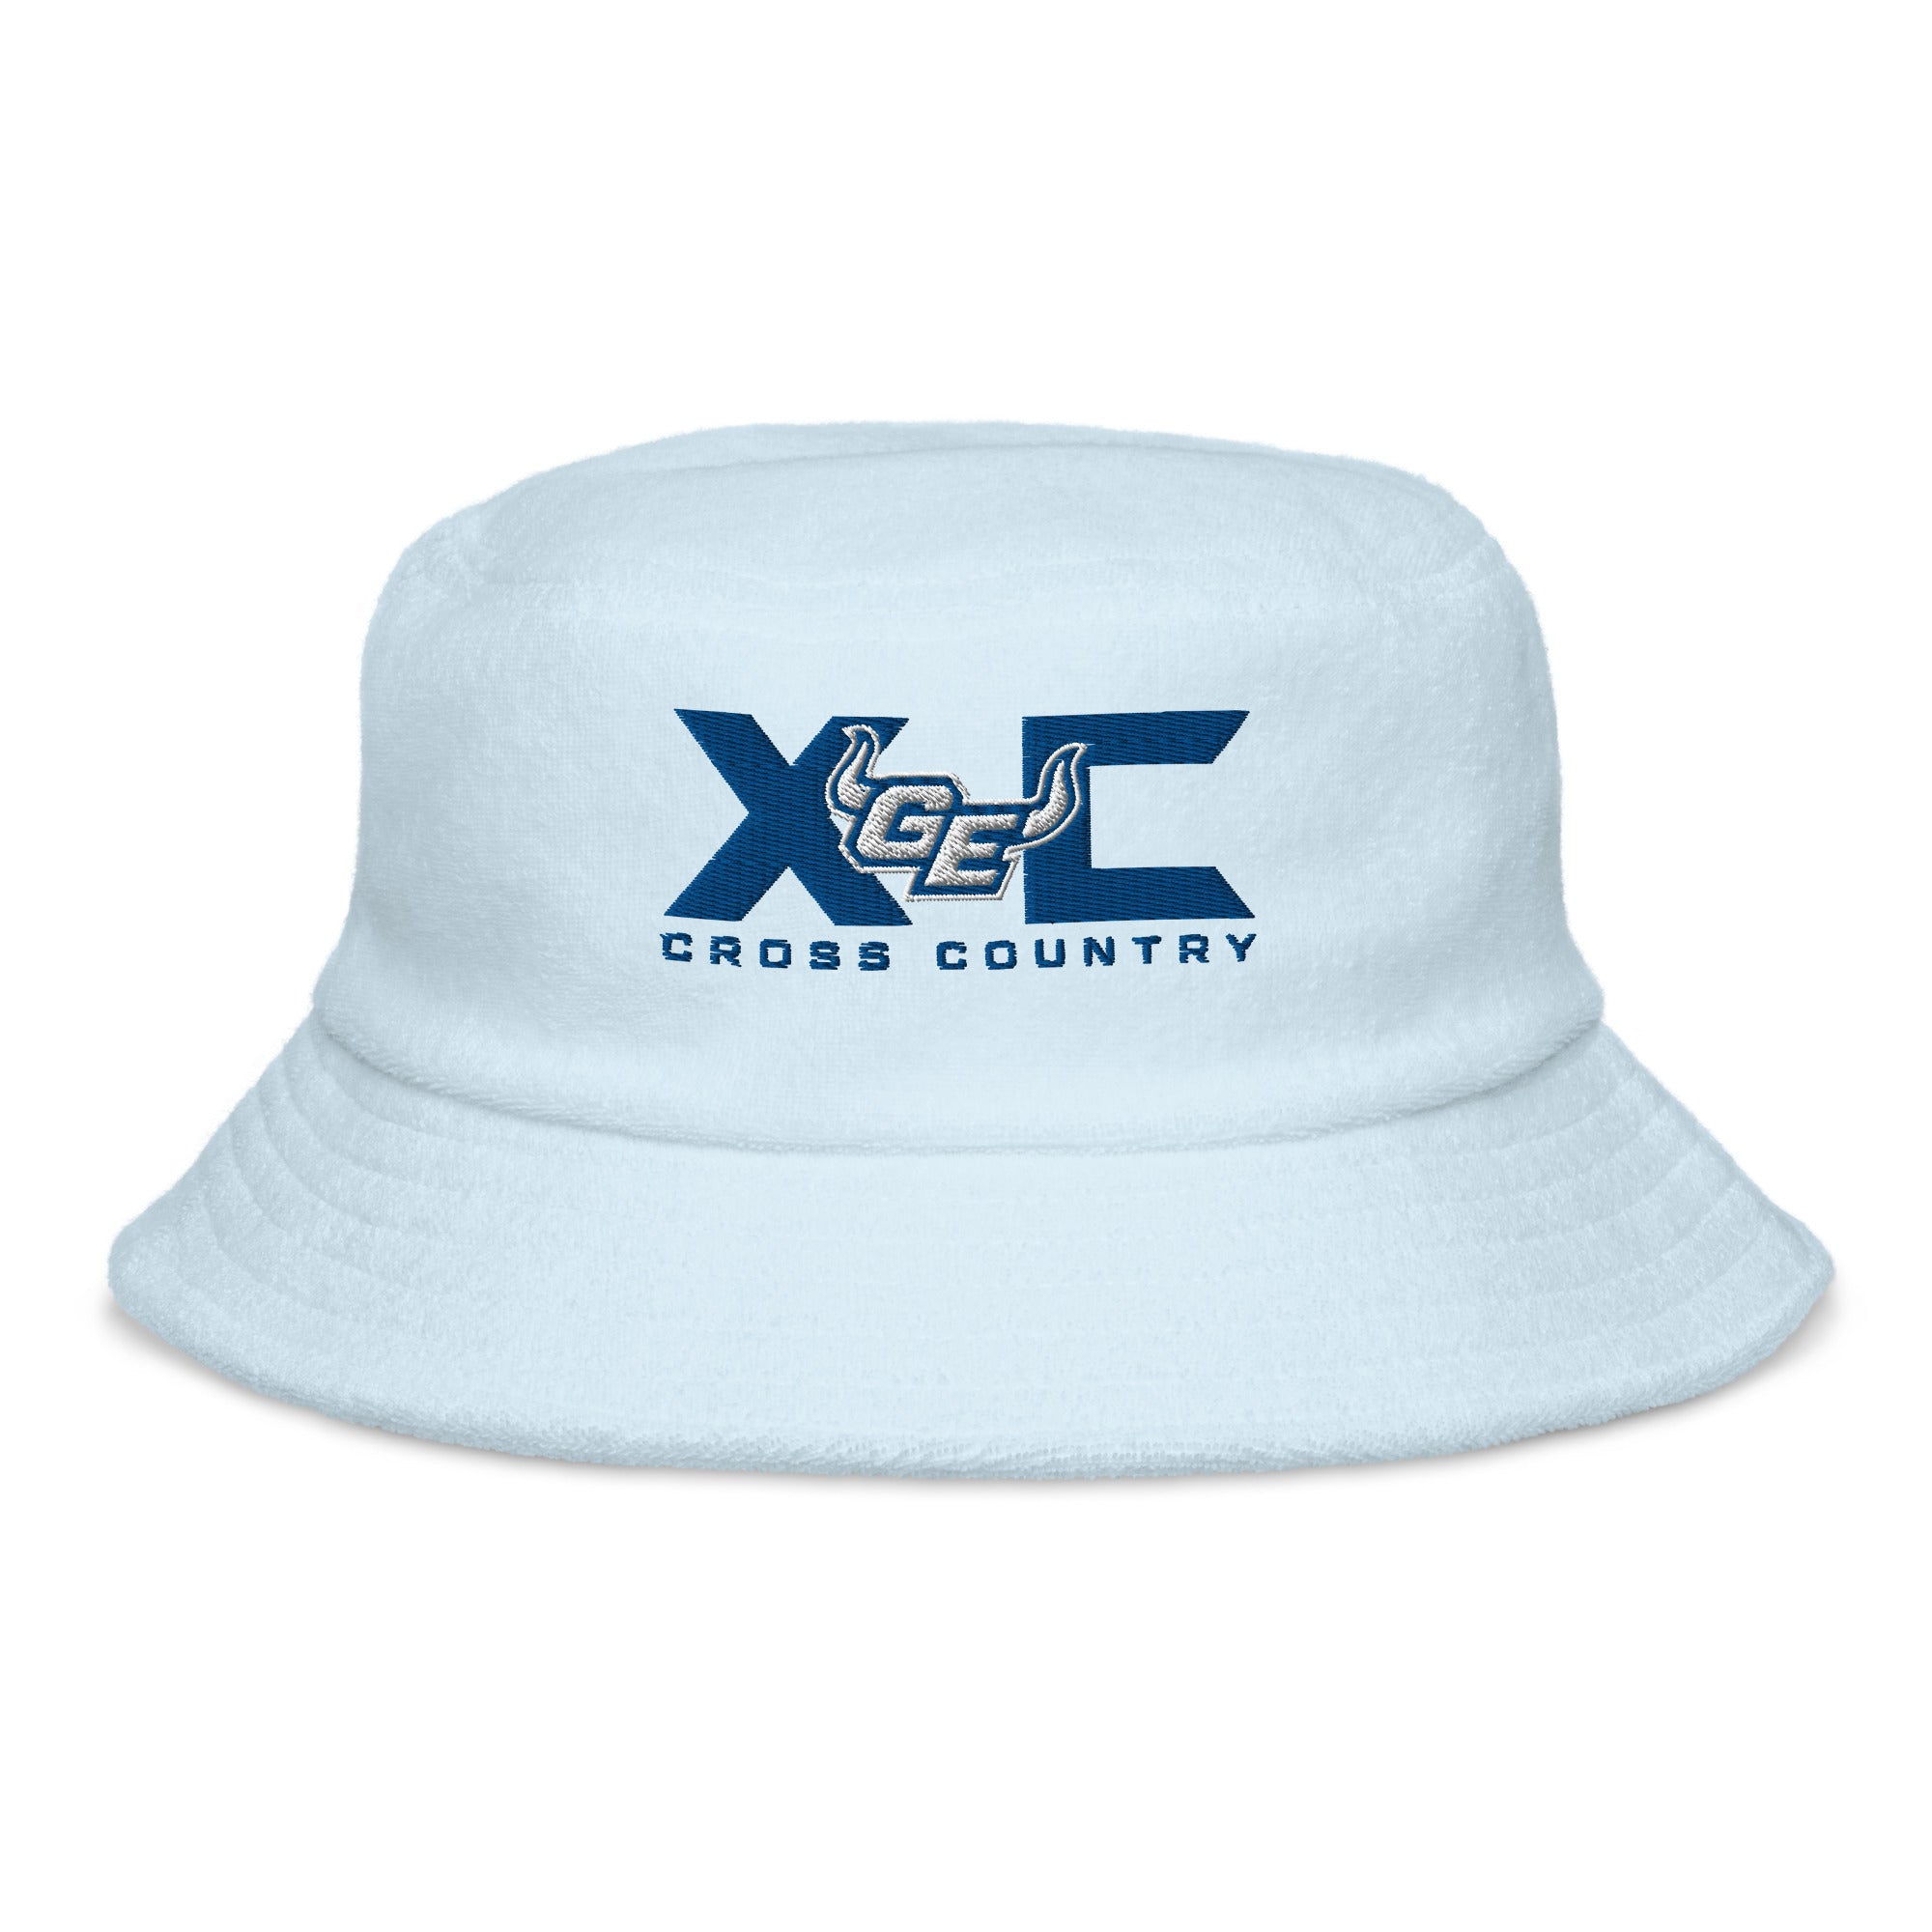 GEXC Cross Country Terry cloth bucket hat